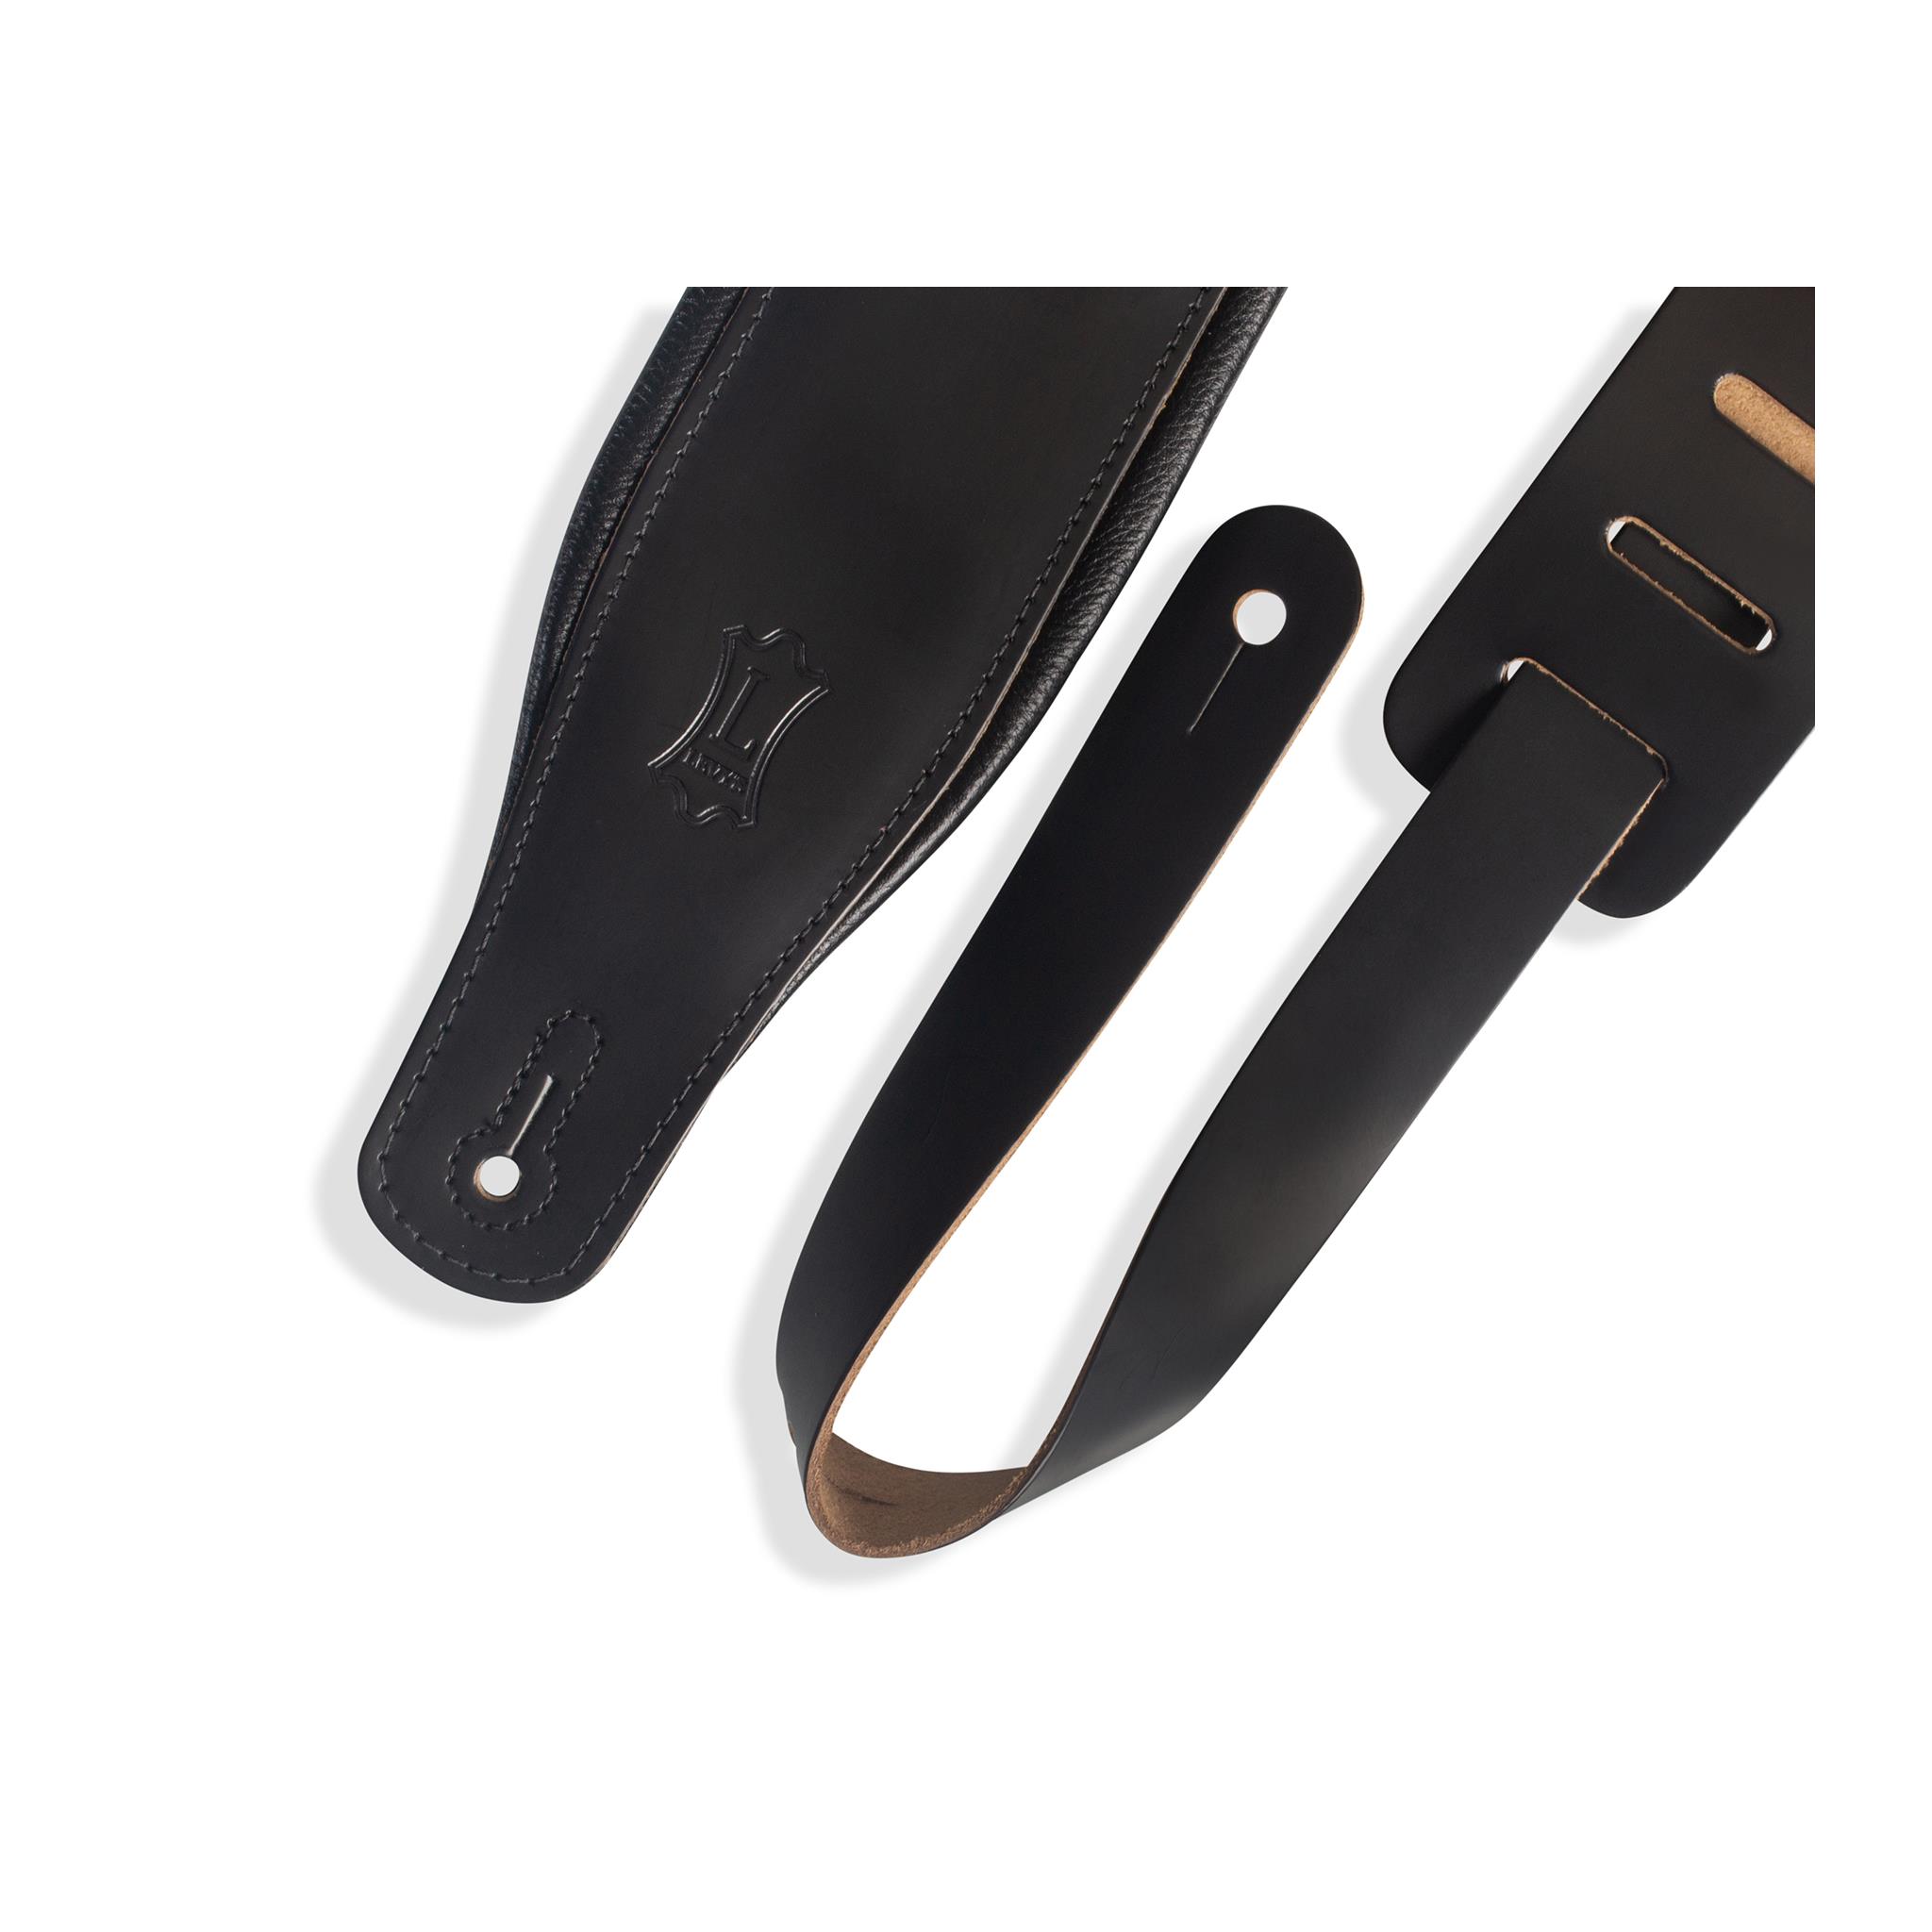 LEVY'S 3 inch Wide Top Grain Leather Guitar Straps